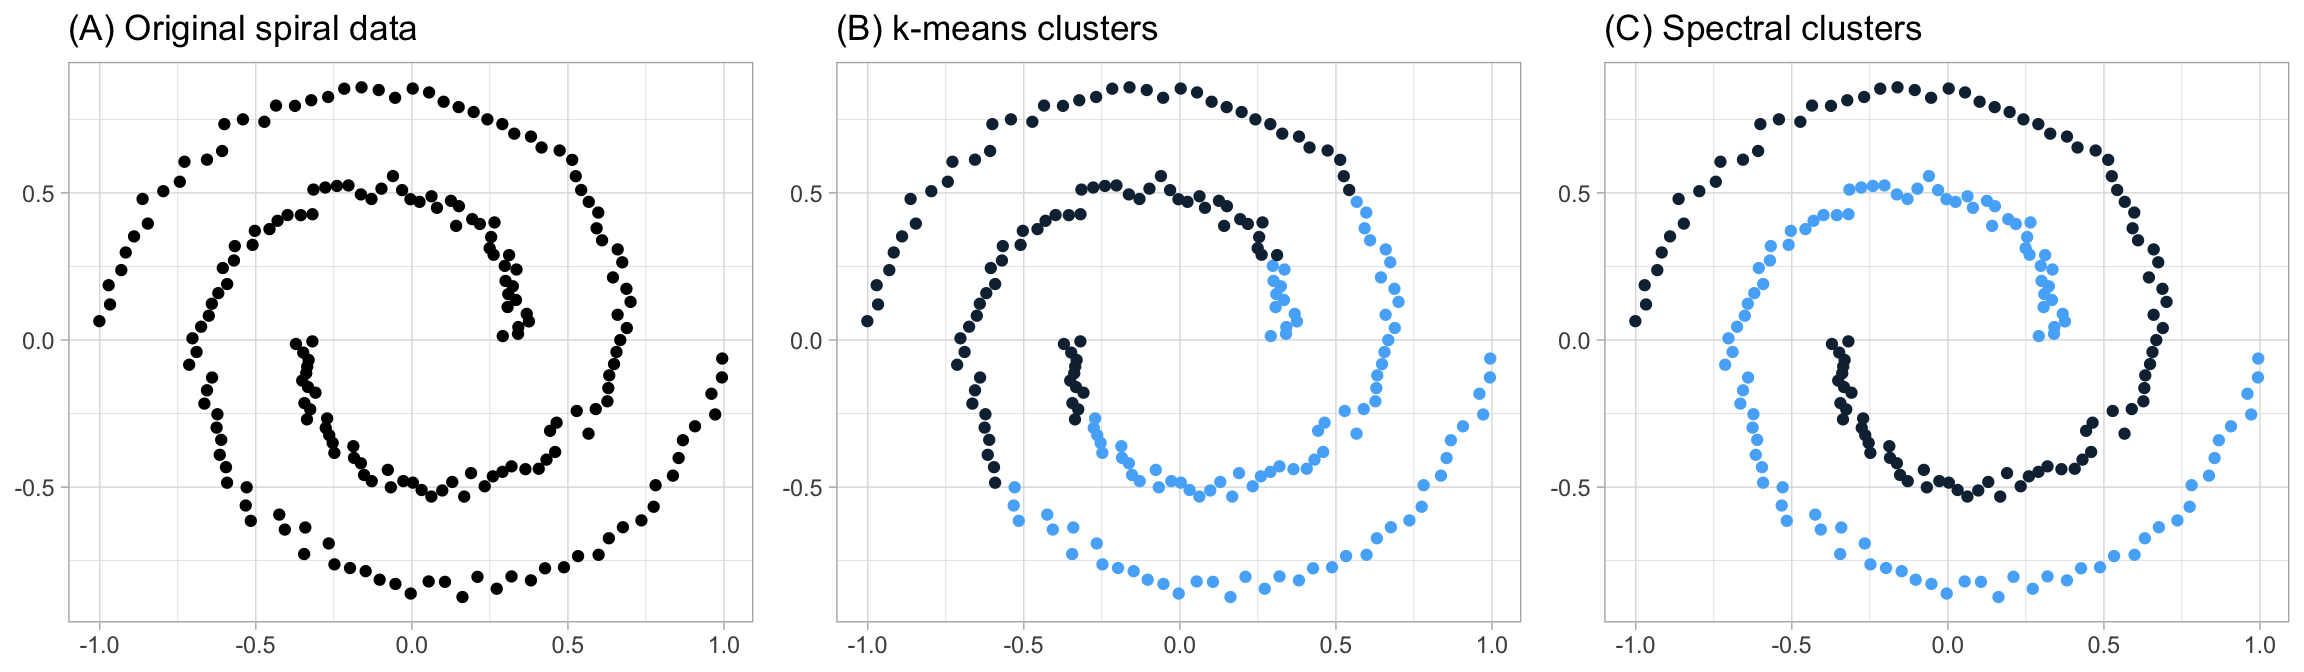 The assumptions of k-means lends it ineffective in capturing complex geometric groupings; however, spectral clustering allows you to cluster data that is connected but not necessarily clustered within convex boundaries.